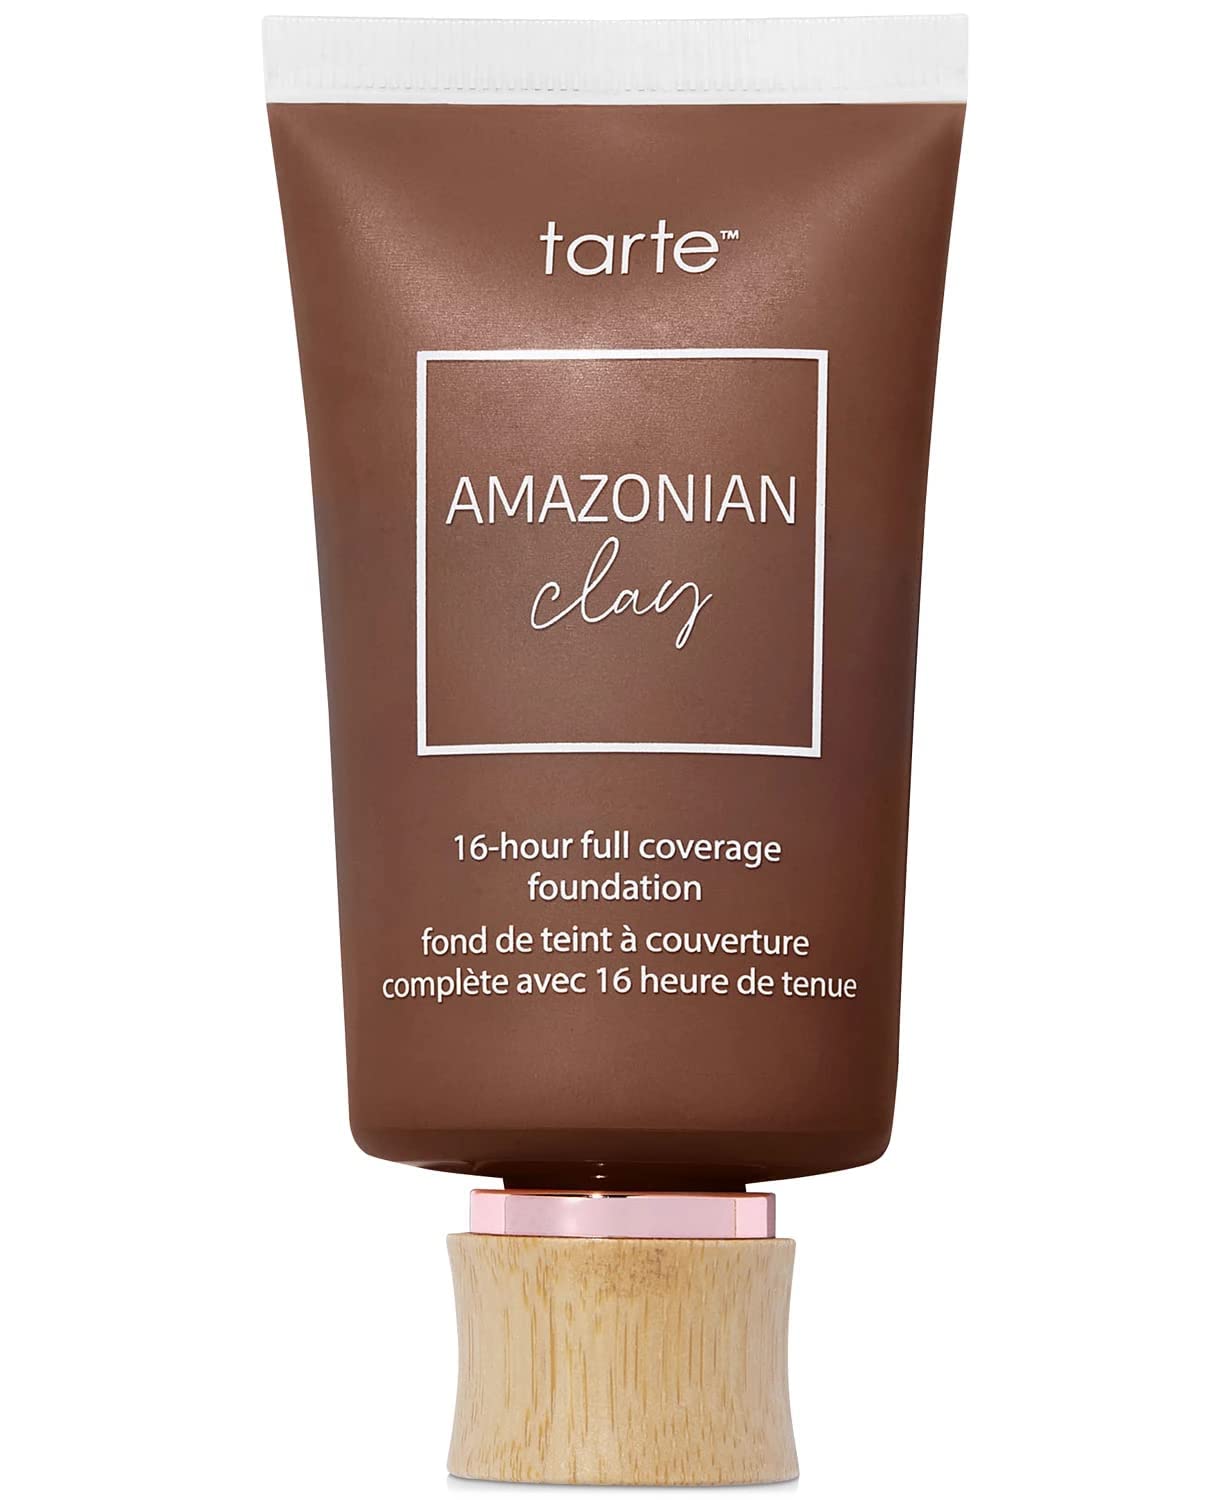 Tarte Amazonian clay 16-hour full coverage foundation - 57N - Rich Neutral